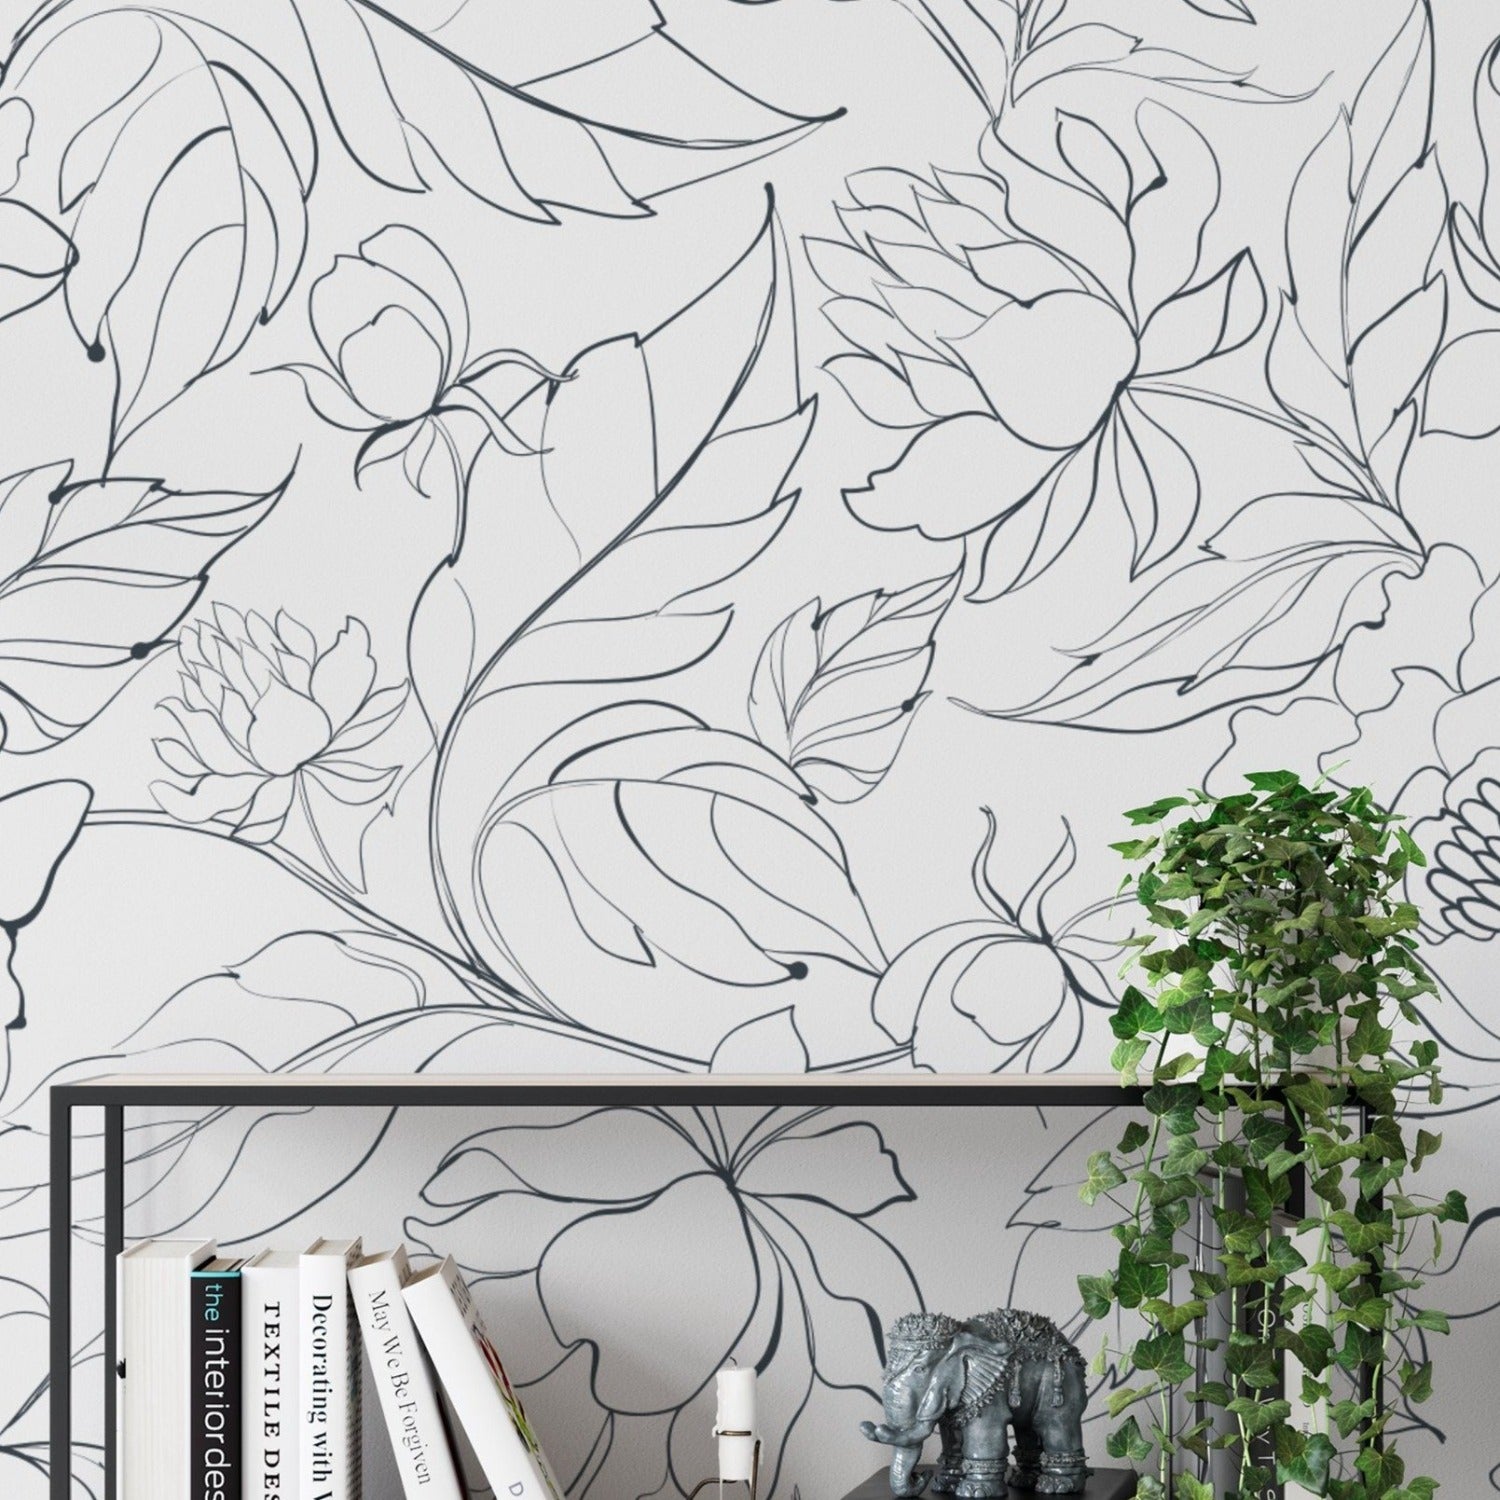 A section of wall with modern black floral wallpaper showcasing bold outlines of various flowers and leaves in a repeating pattern, with a sleek black metal shelf carrying books and a small elephant figurine, beside a climbing ivy plant.